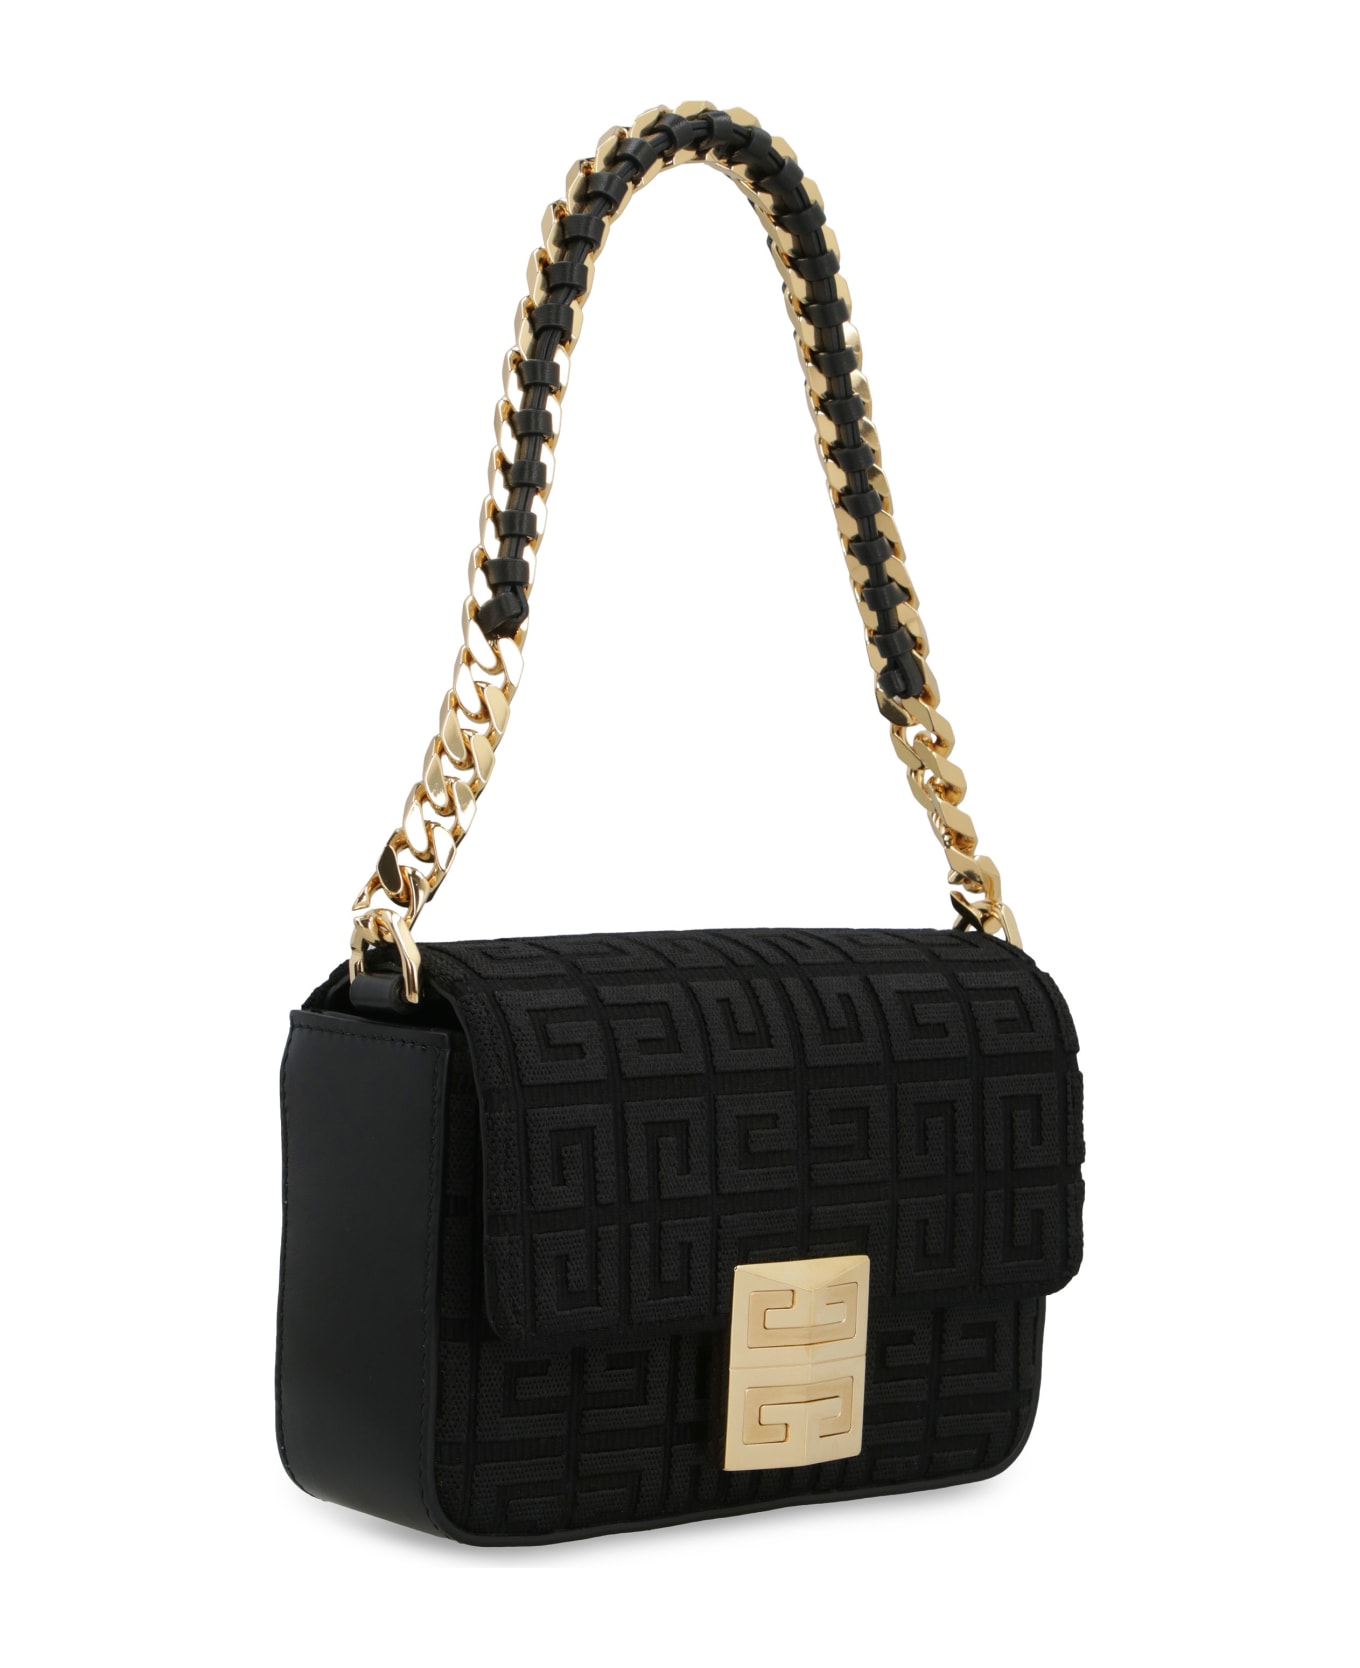 Givenchy Black Small Model 4g Bag With 4g Embroidery And Chain - black